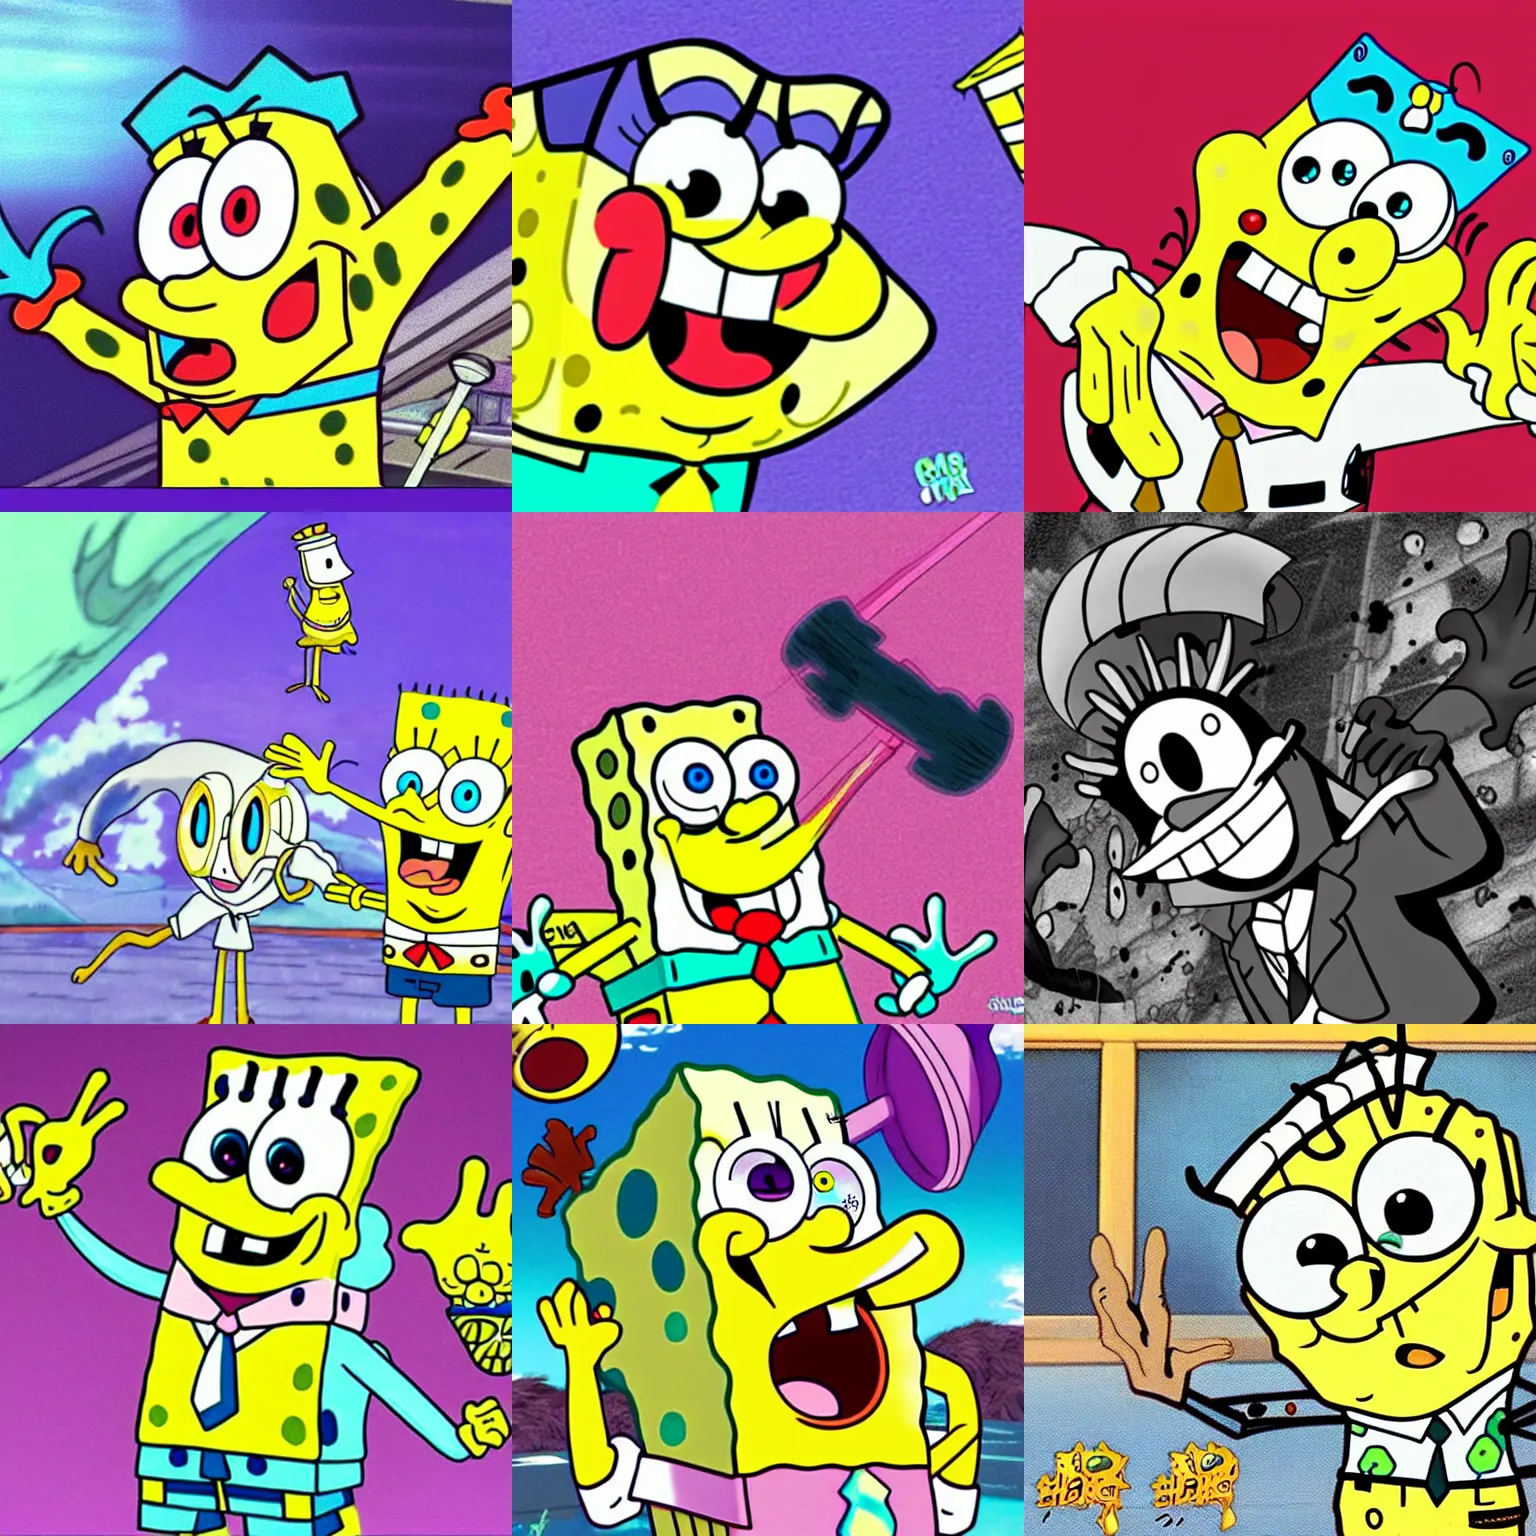 Prompt: SpongeBob as an anime or manga character, transforming into his final form